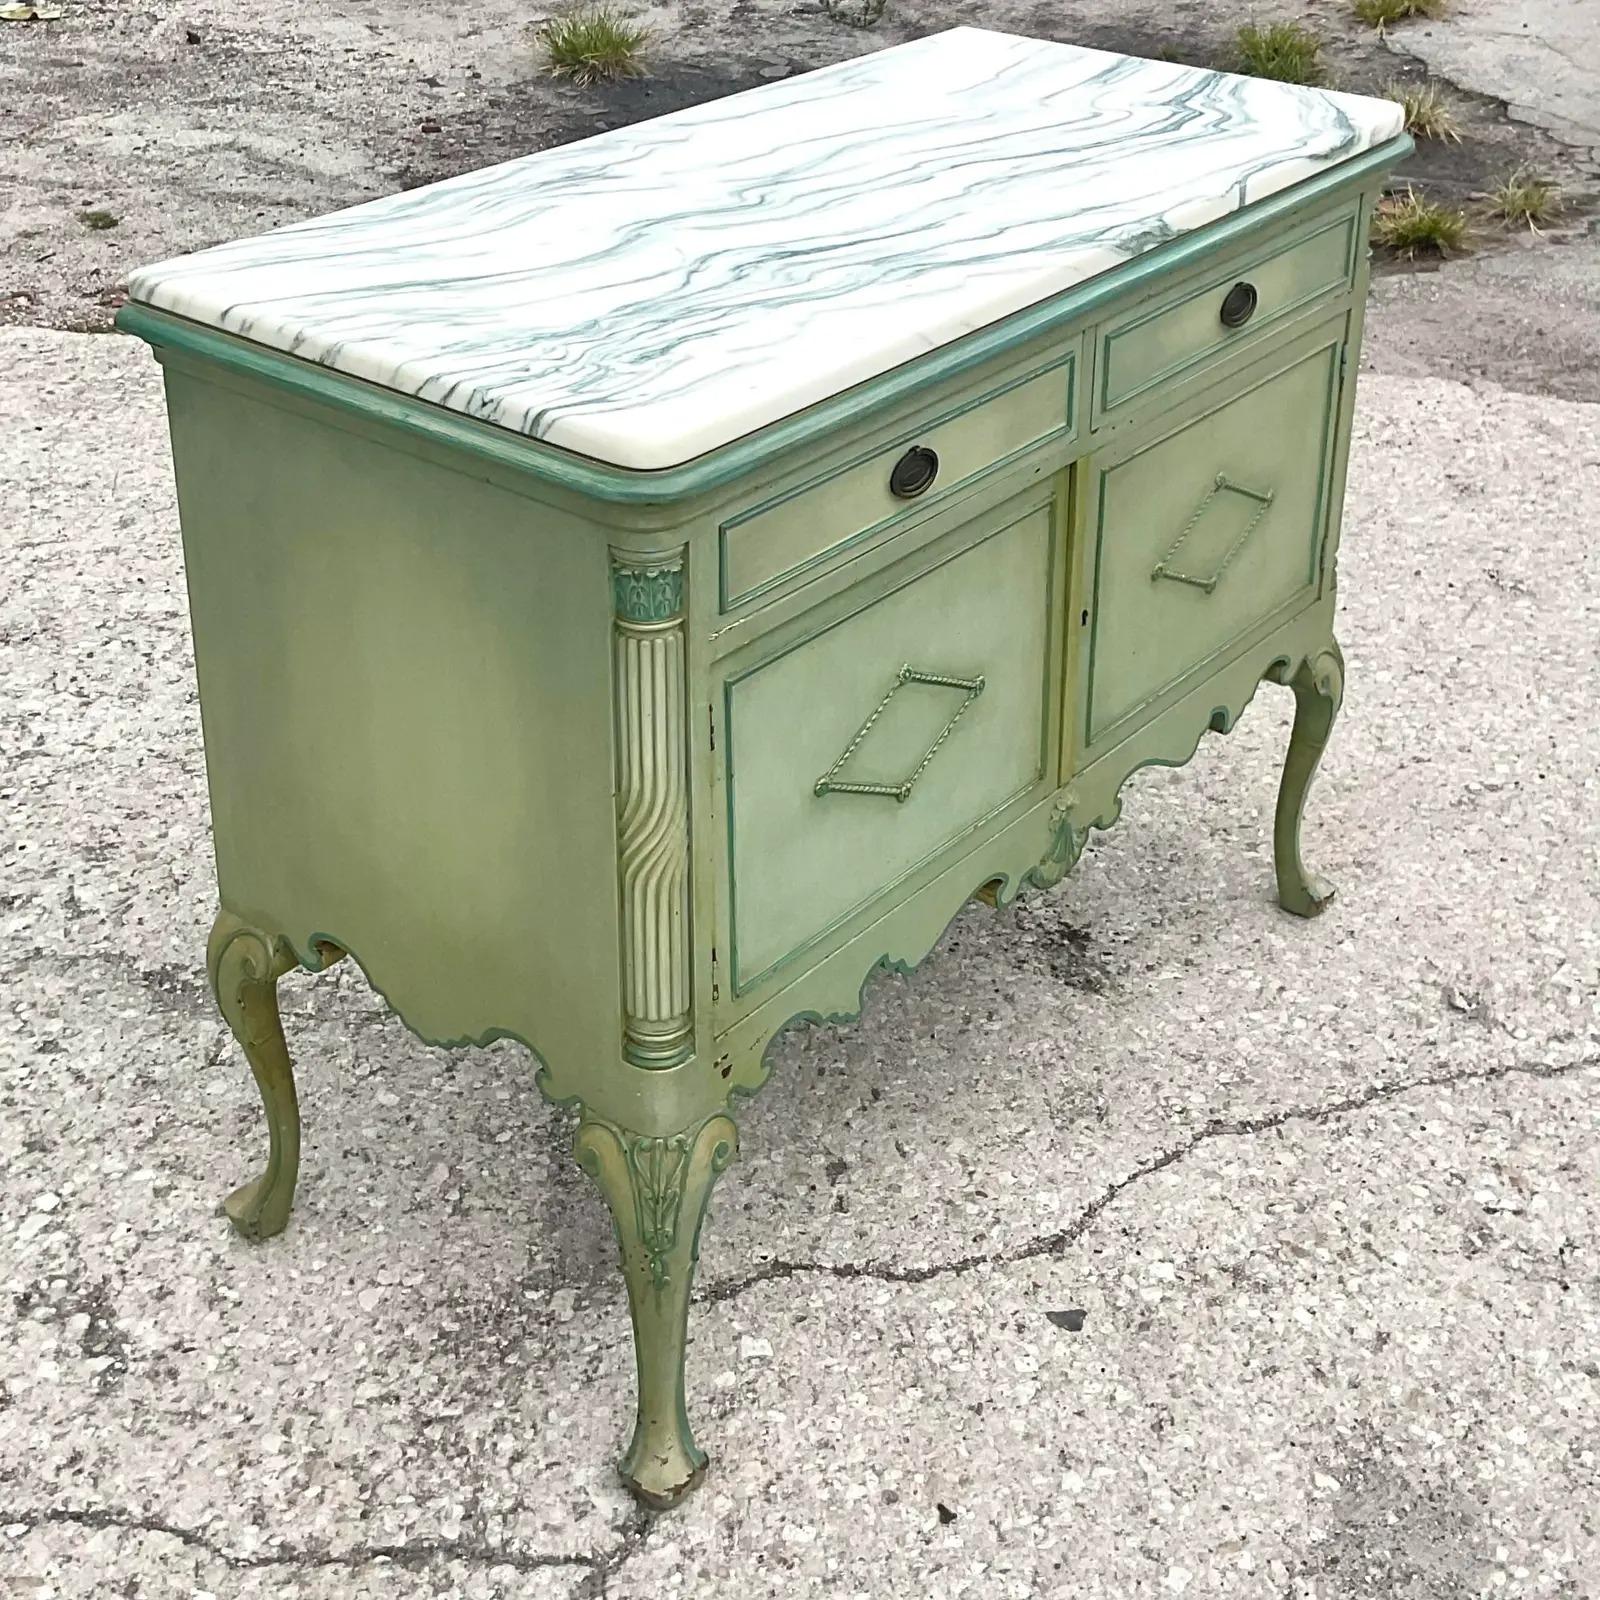 Fabulous vintage Regency sideboard. A beautiful painted cabinet with lots of hand carved detail. Fabulous marble slab on top. Interior drawers make this ideal for linen storage. Acquired from a Palm Beach estate.